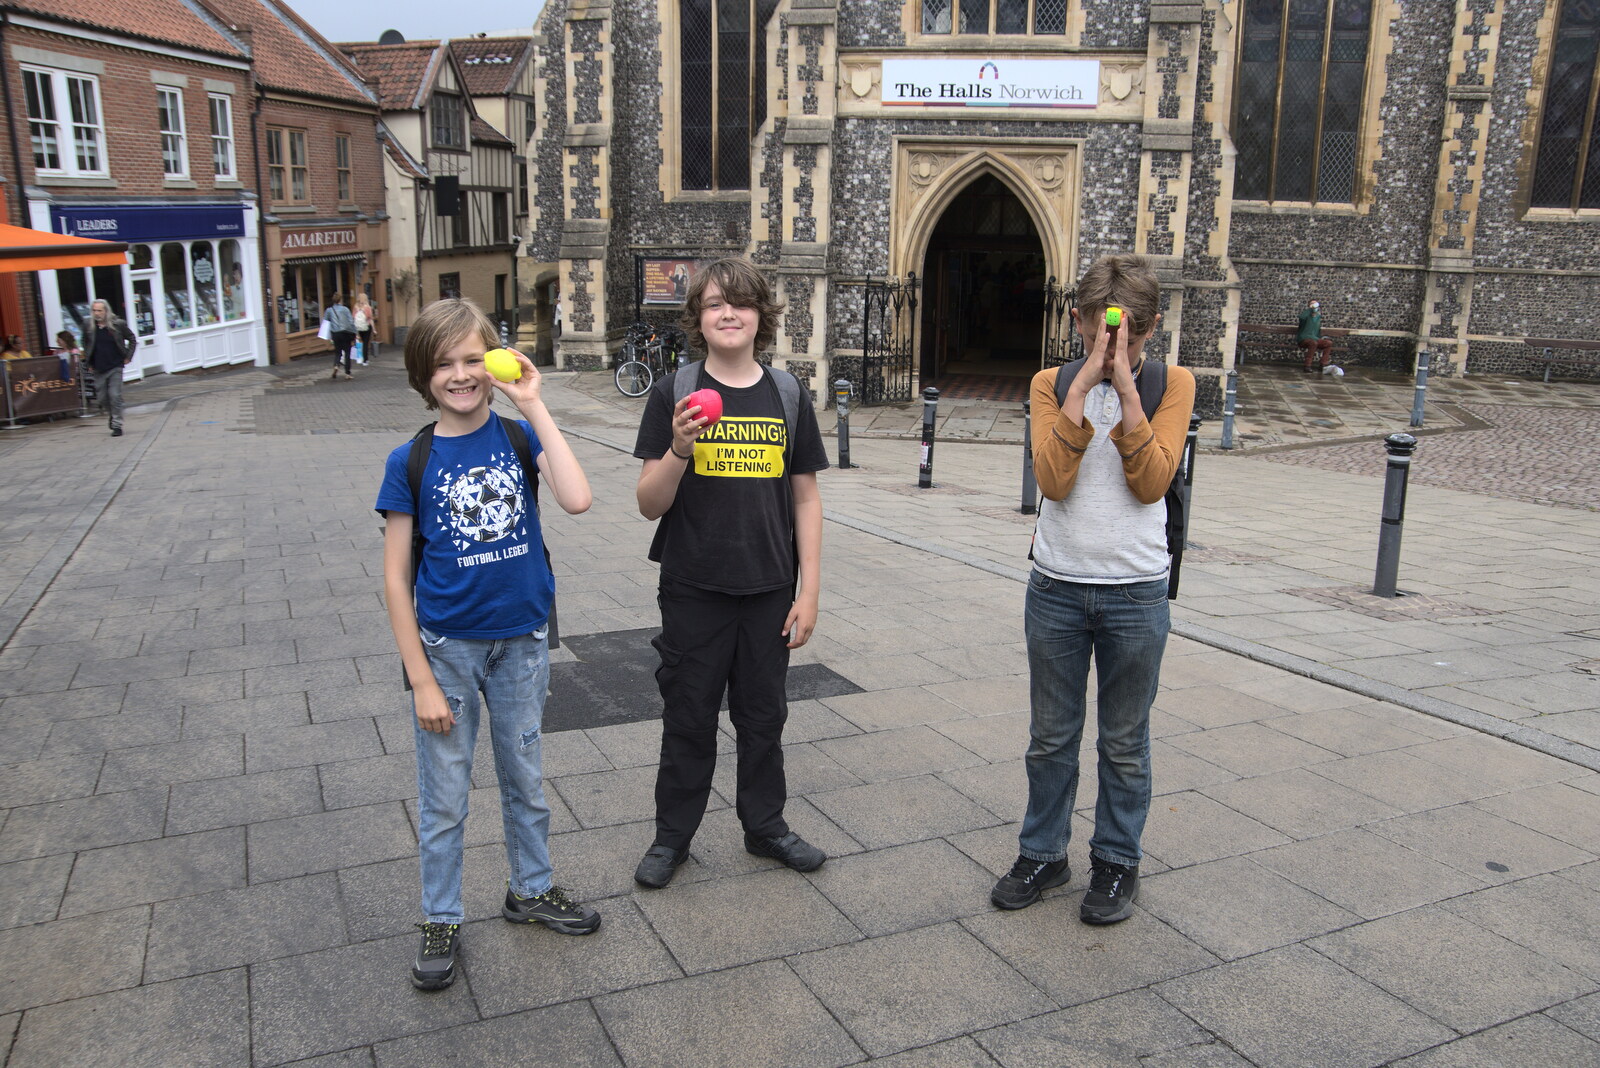 The World Cube Association Rubik's Competition, St. Andrew's Hall, Norwich - 31st July 2022: The boys pose with their cubes outside St. Andrew's